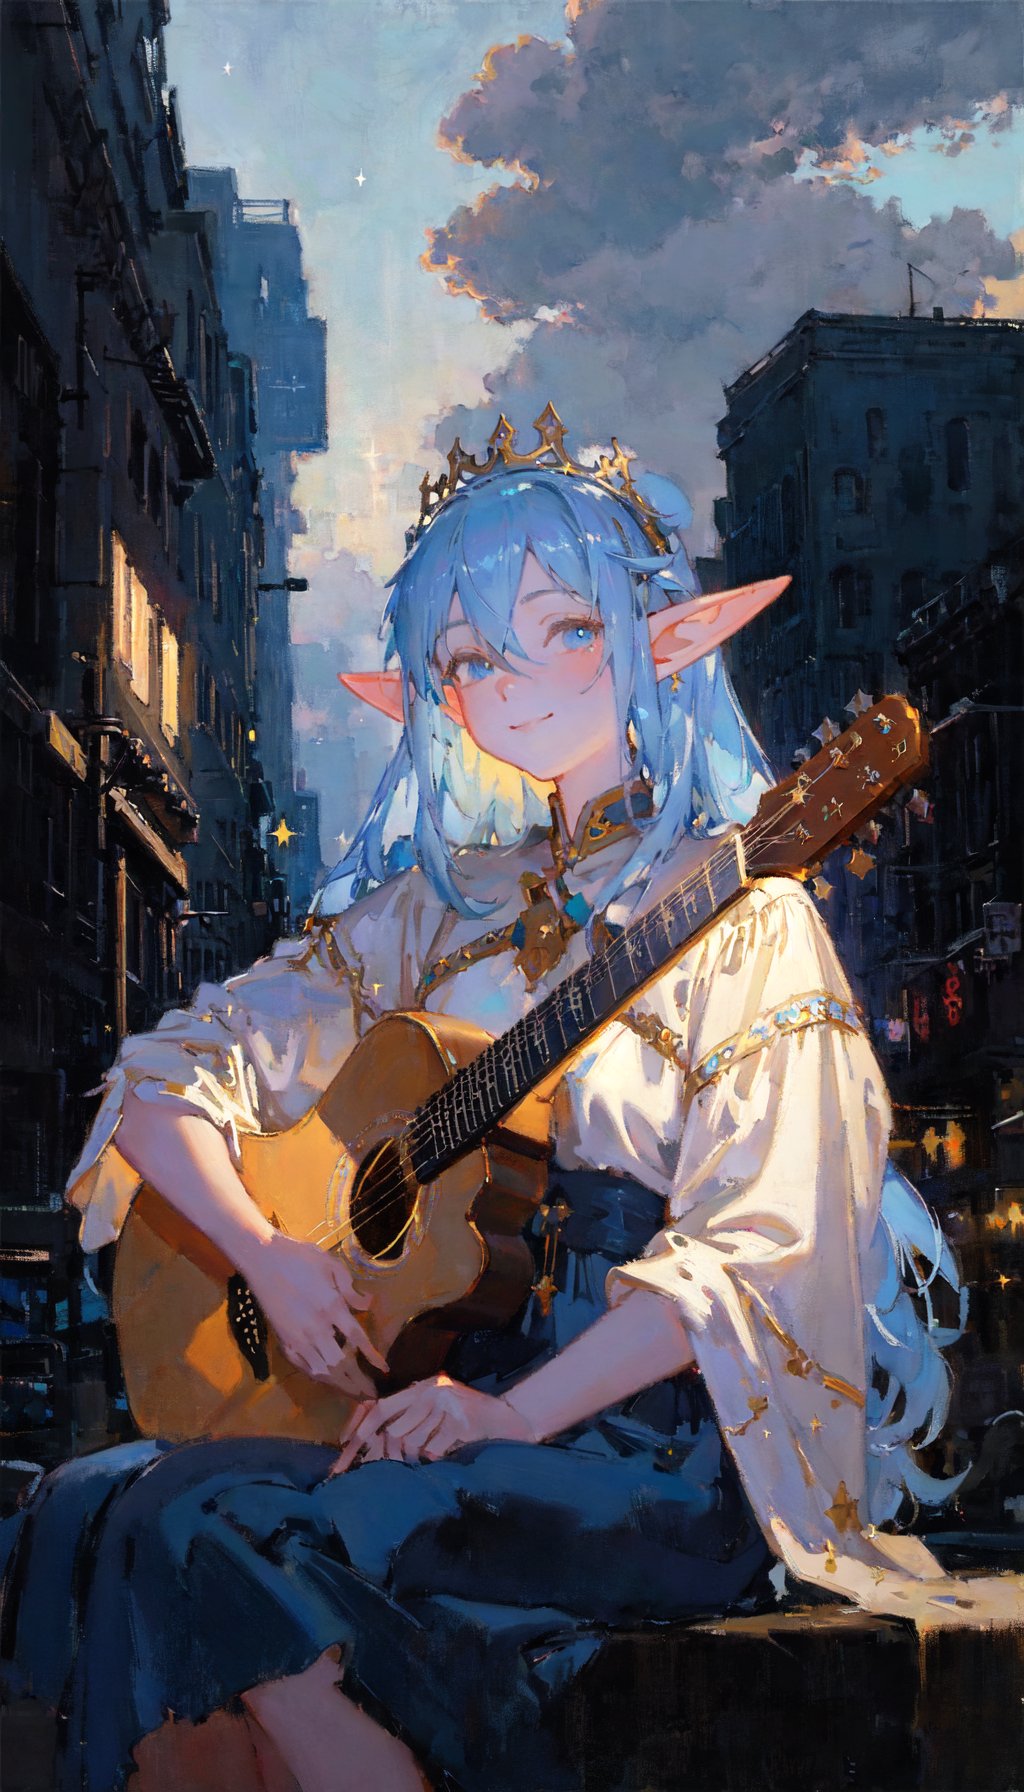 masterpiece, best quality, beautiful oil painting illustration, the cloud elf queen busks on the streets of new york, casual, sitting, playing guitar, portrait, dark moody lighting, night sky, night, starry sky, glittering, sparkle, dark, (smile:0.8)